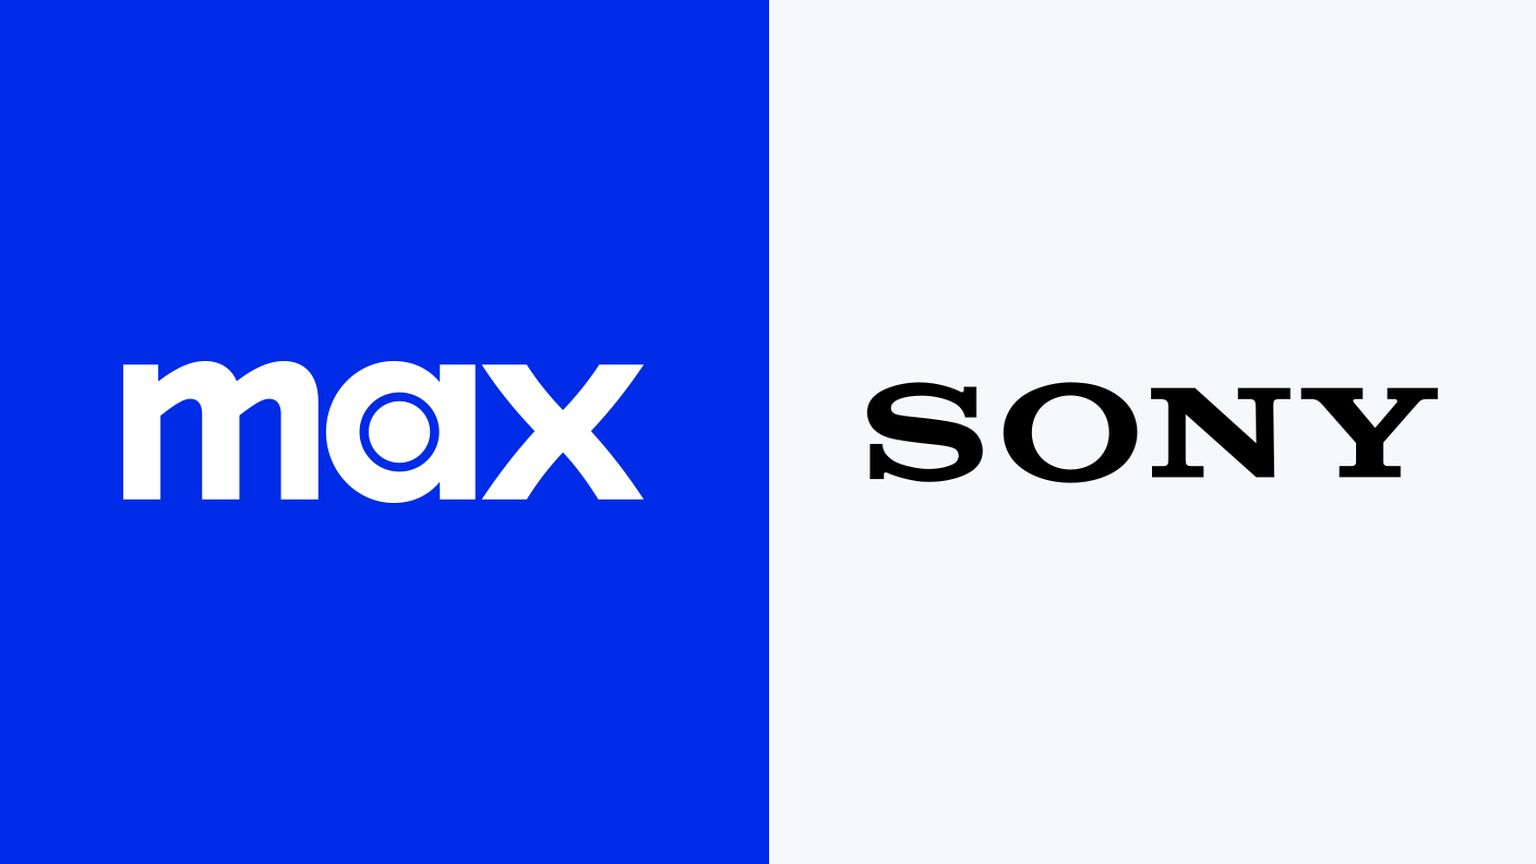 How To Add Hbo Max To Sony Smart TV